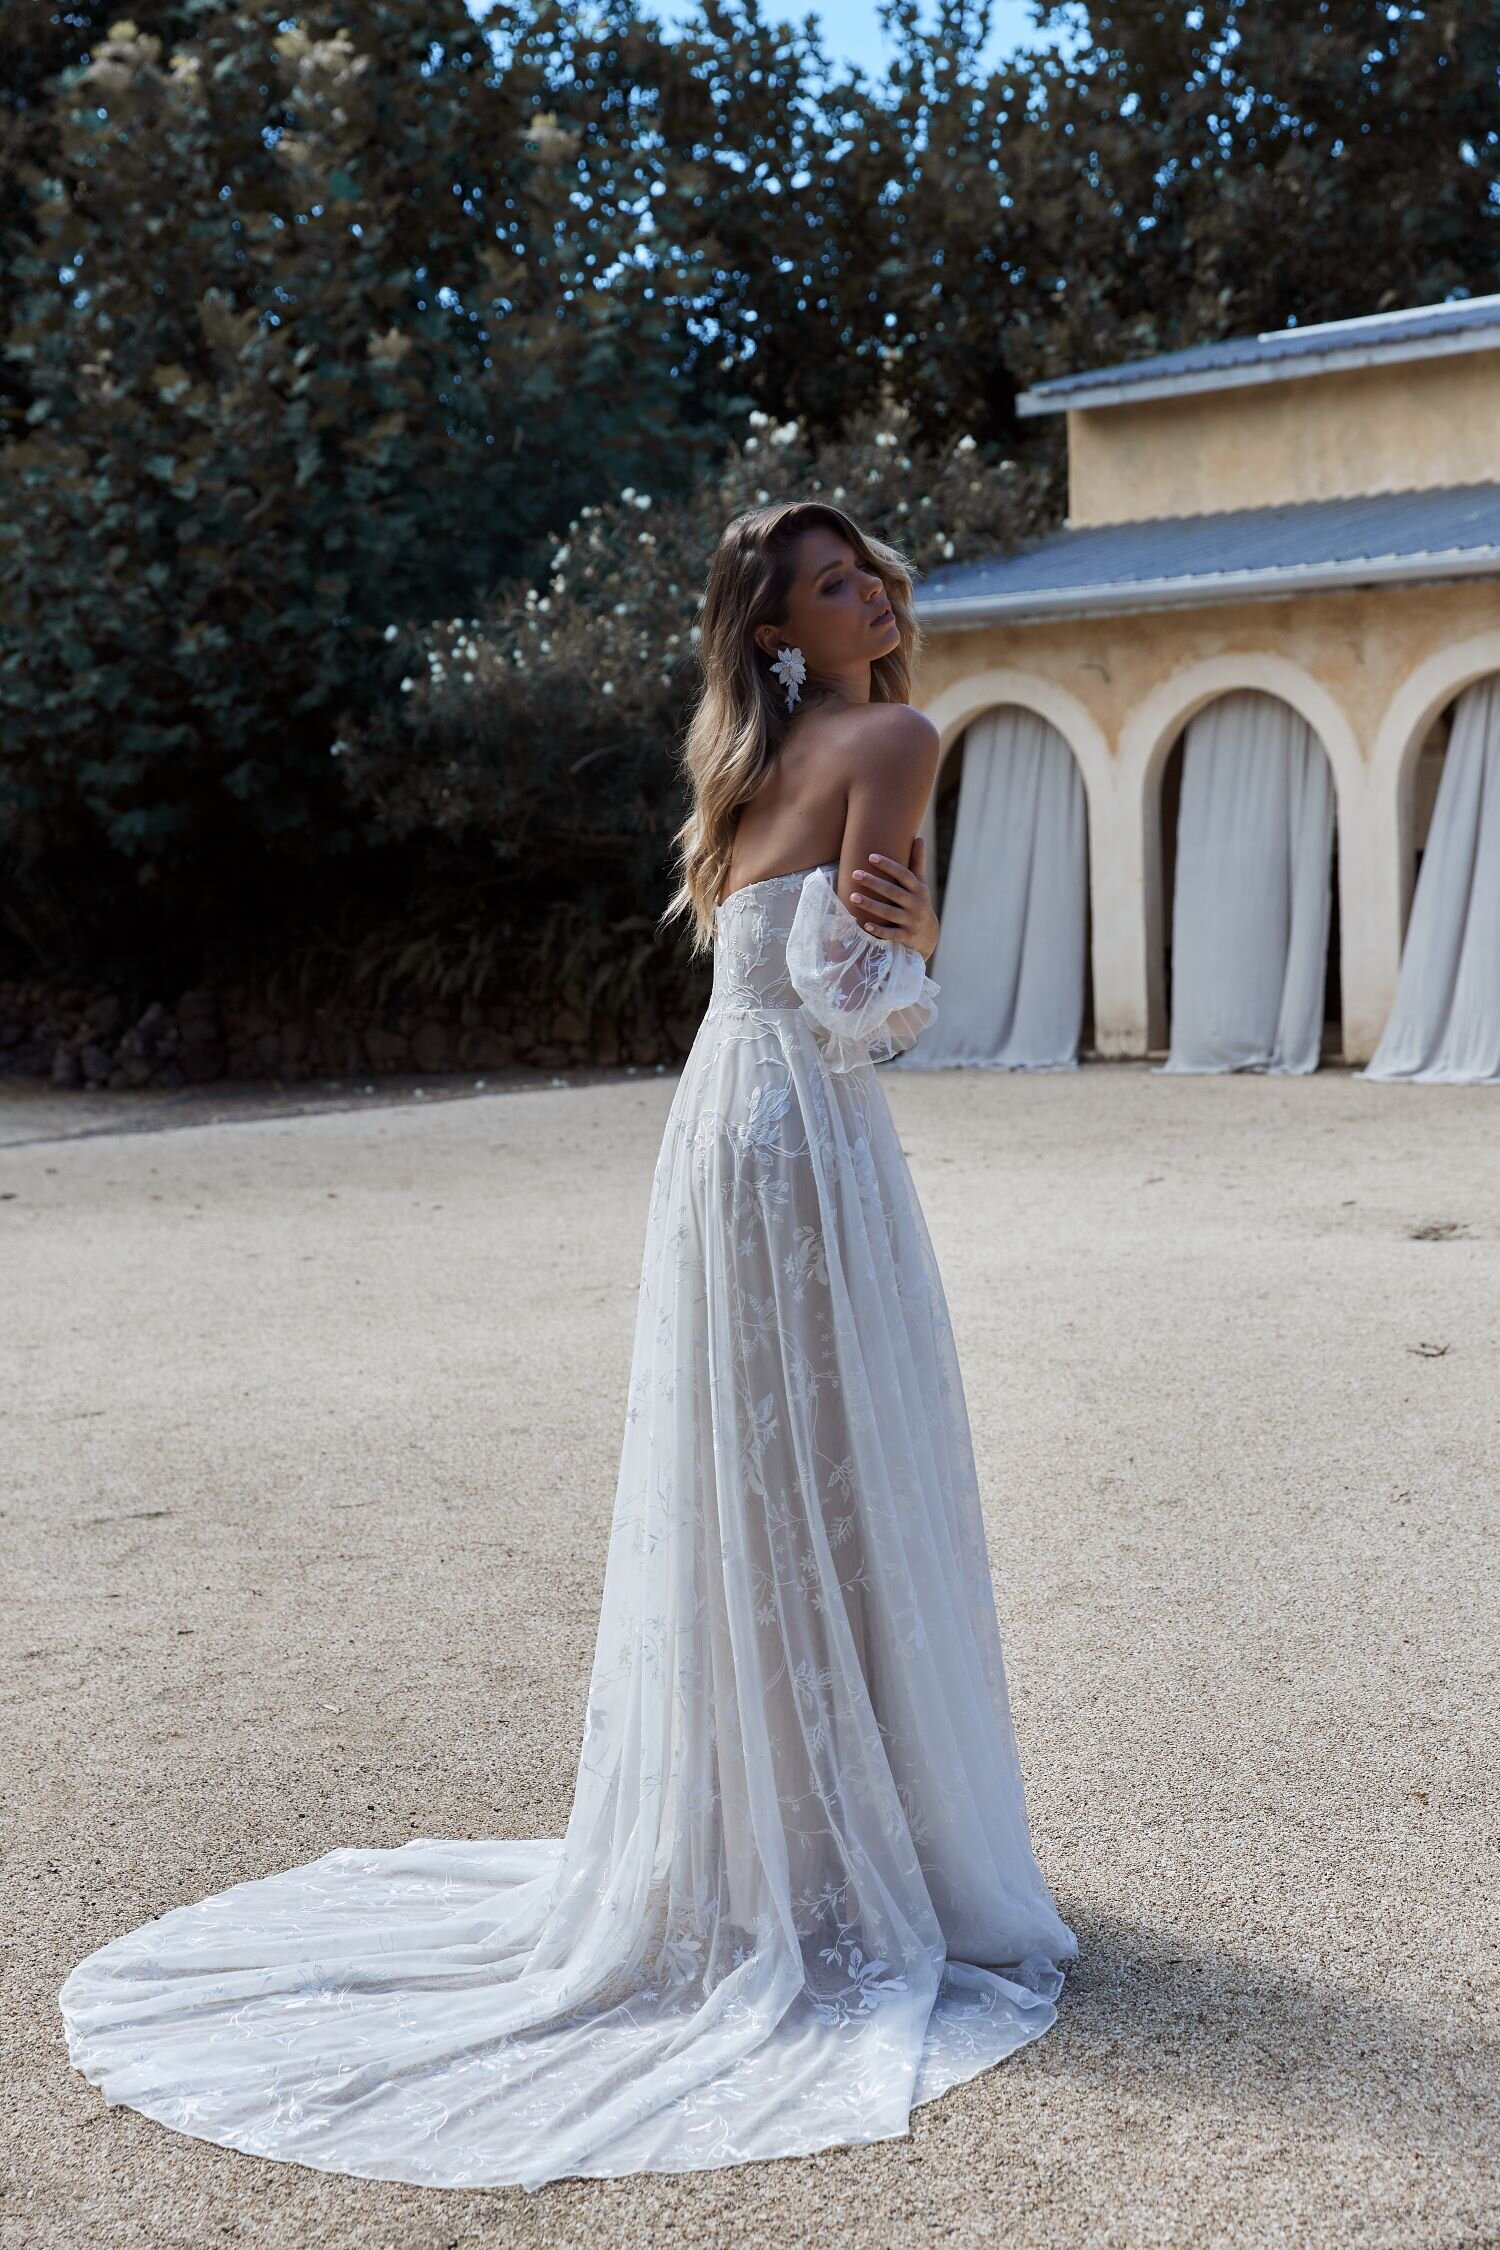 Straps Vs. Strapless Wedding Dresses: Which Will You Choose